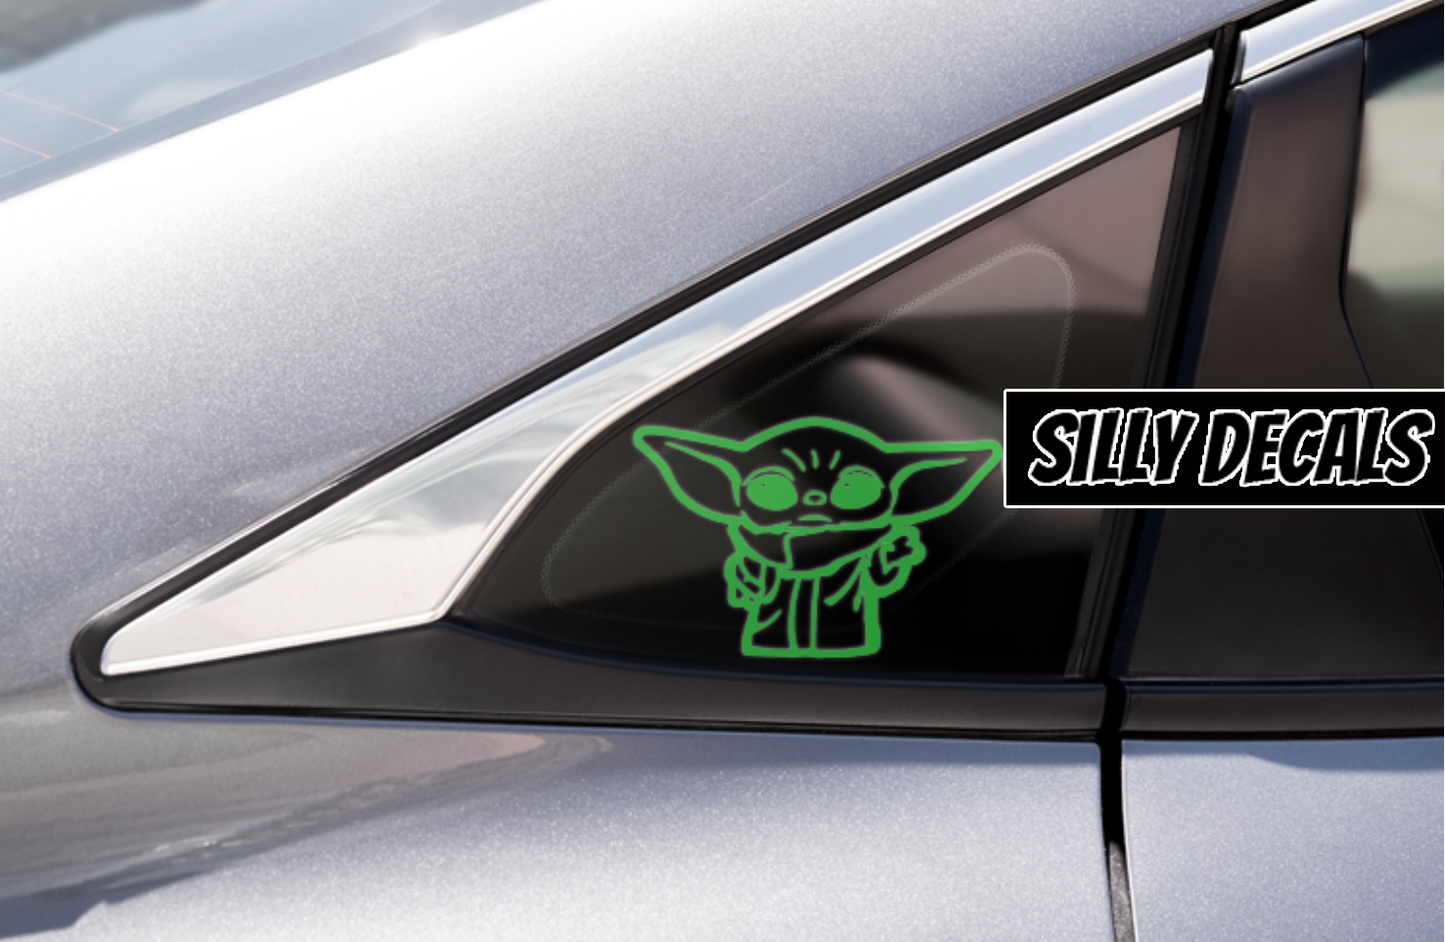 Yoda; StarWars Inspired Vinyl Decals Suitable For Cars, Windows, Walls, and More!